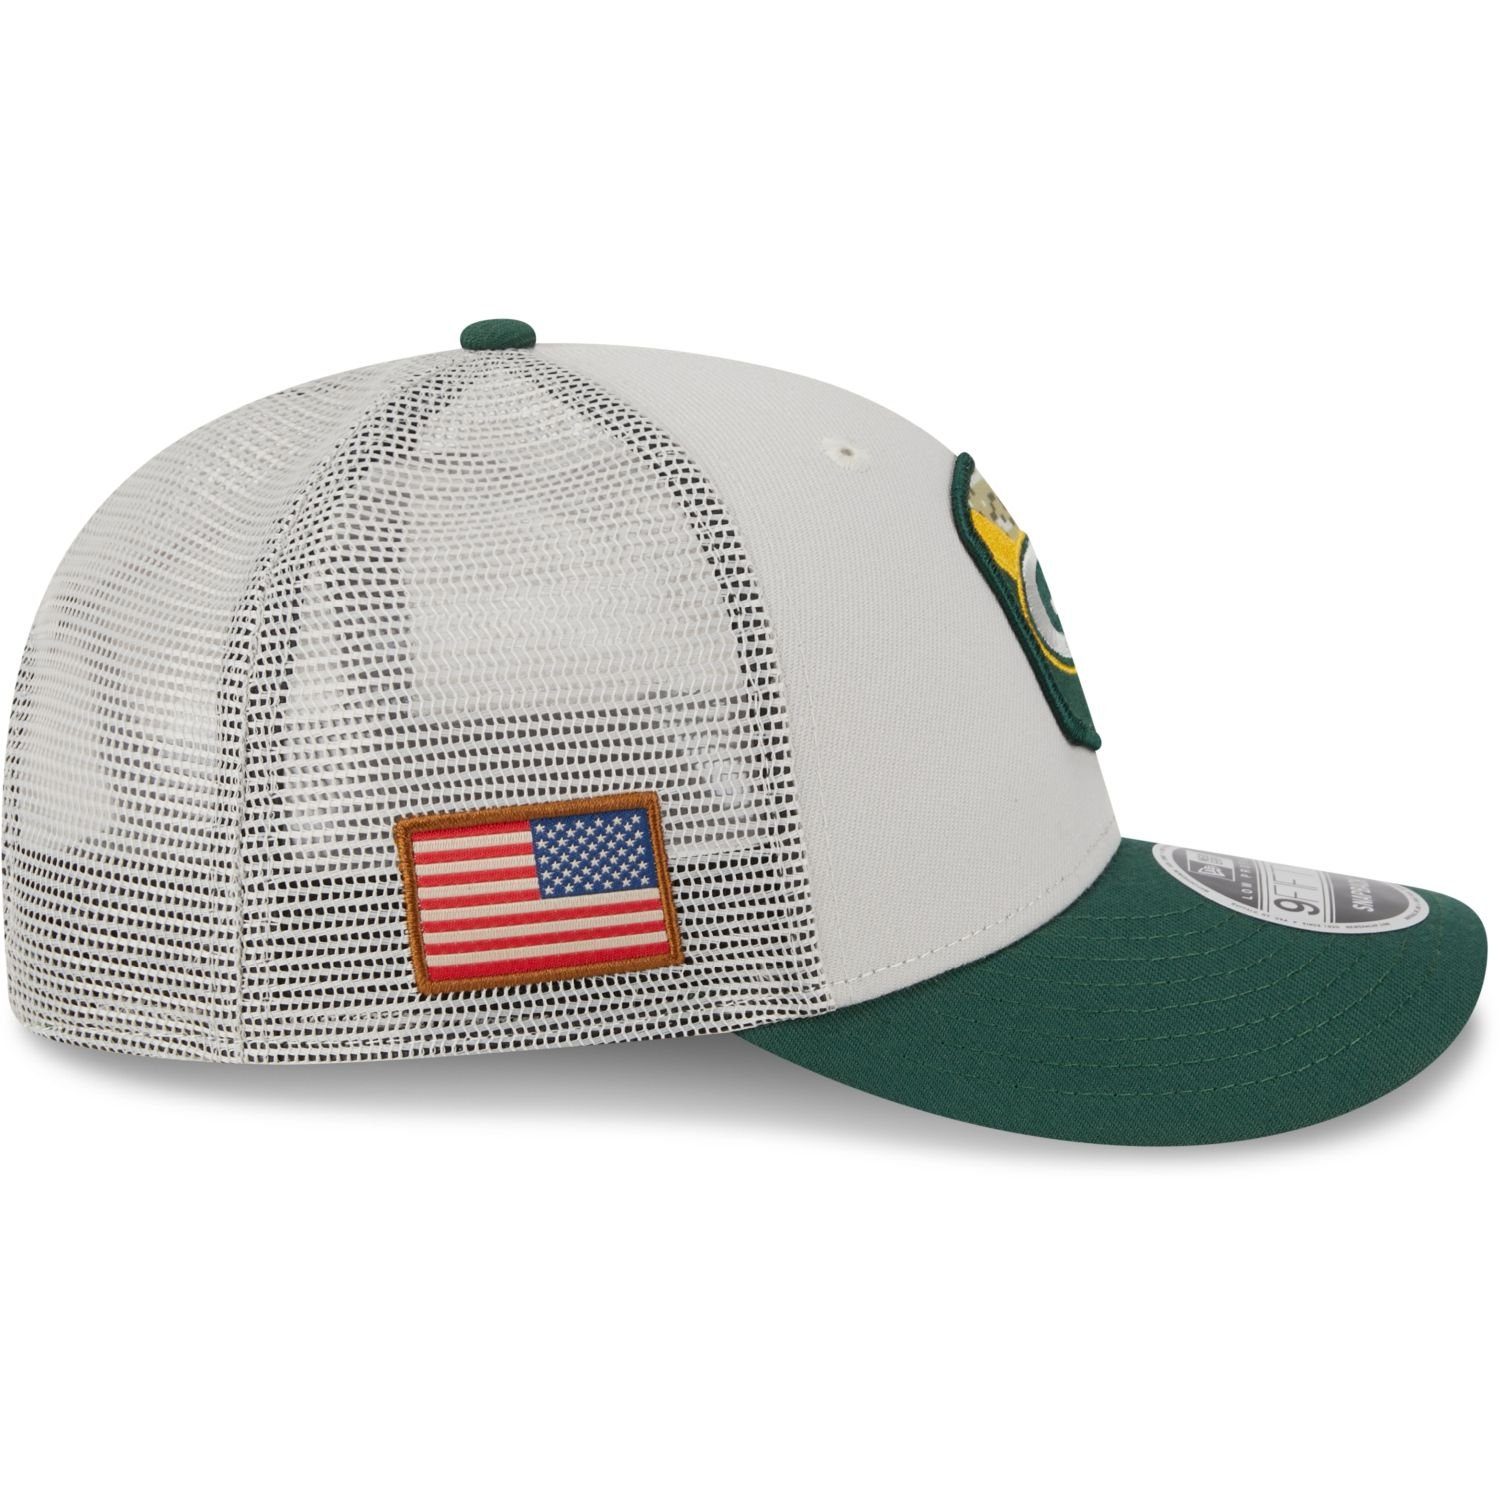 Salute to Packers Service Cap Low Snap Era Snapback New Profile 9Fifty Green Bay NFL